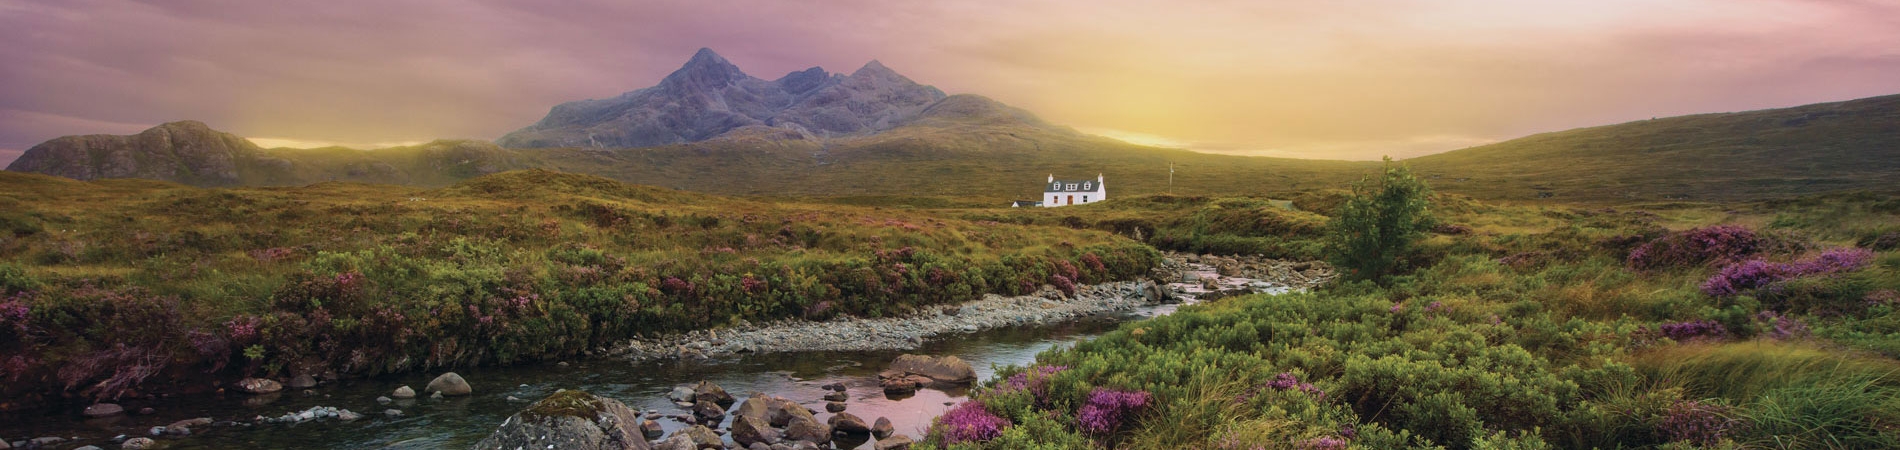 Lochs & Glens offer gift cards so love ones can enjoy a coach holiday to Scotland